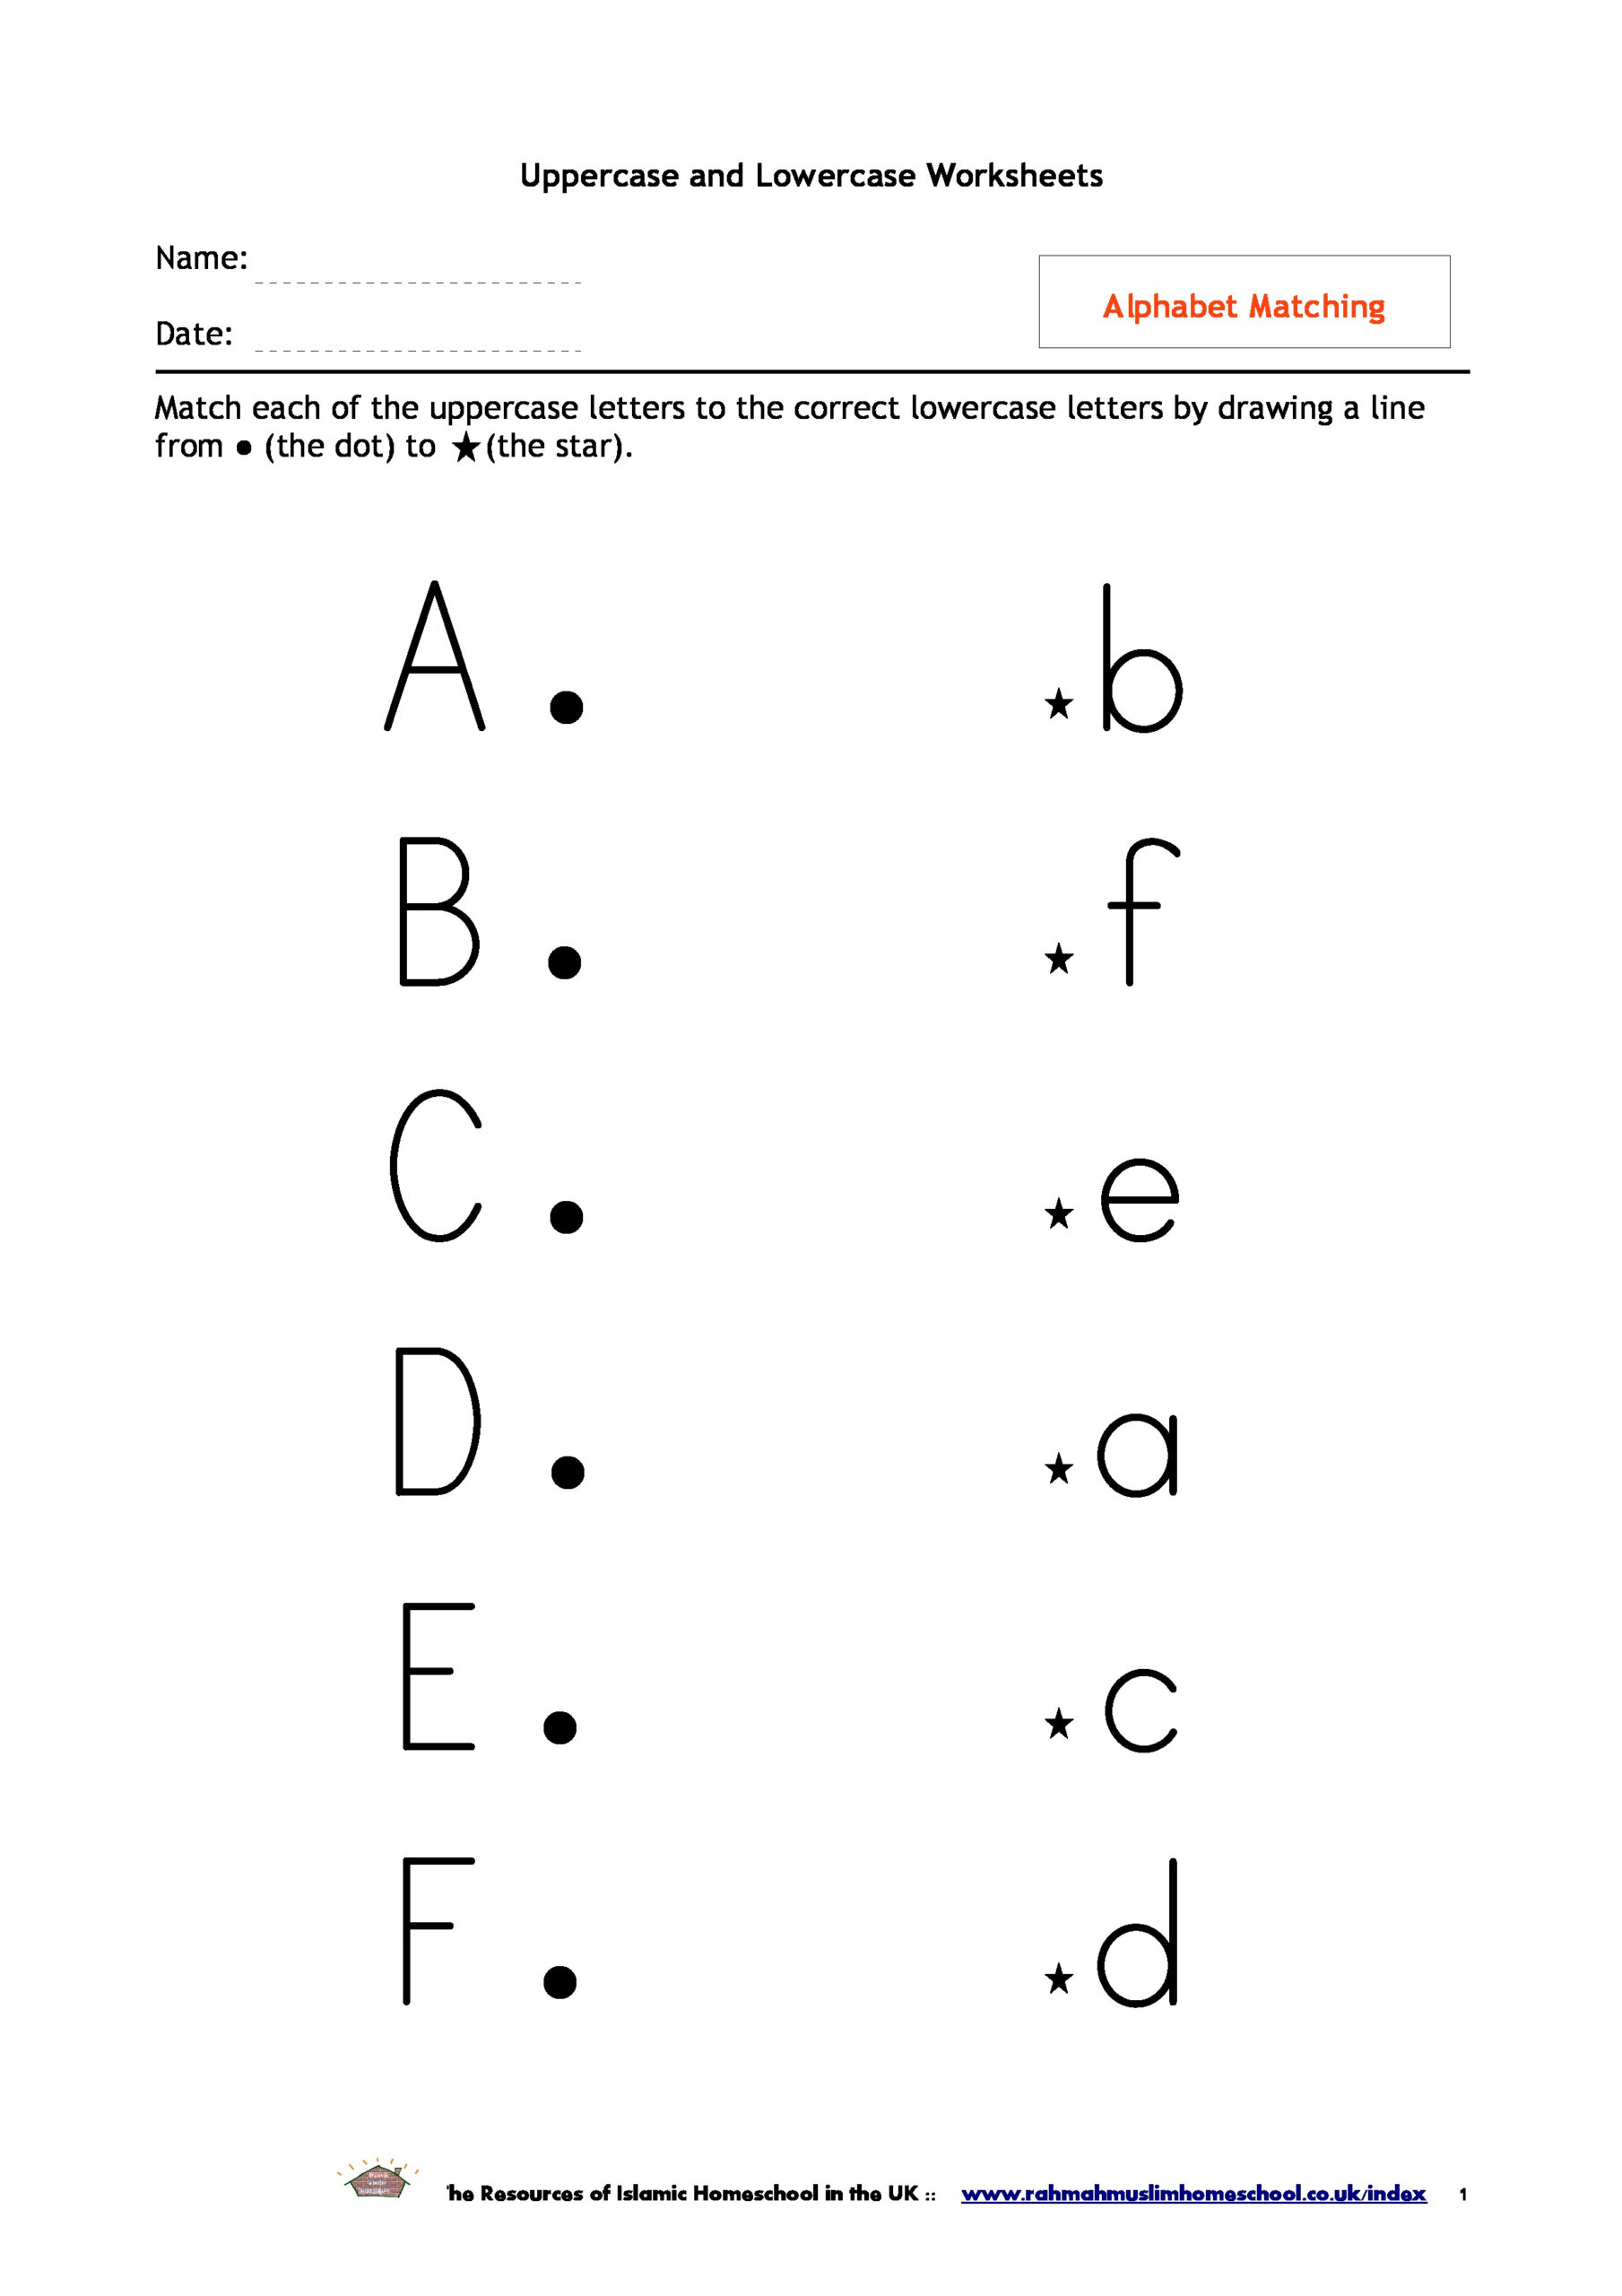 Alphabet Matching Worksheets | The Resources Of Islamic regarding Alphabet Matching Worksheets With Pictures